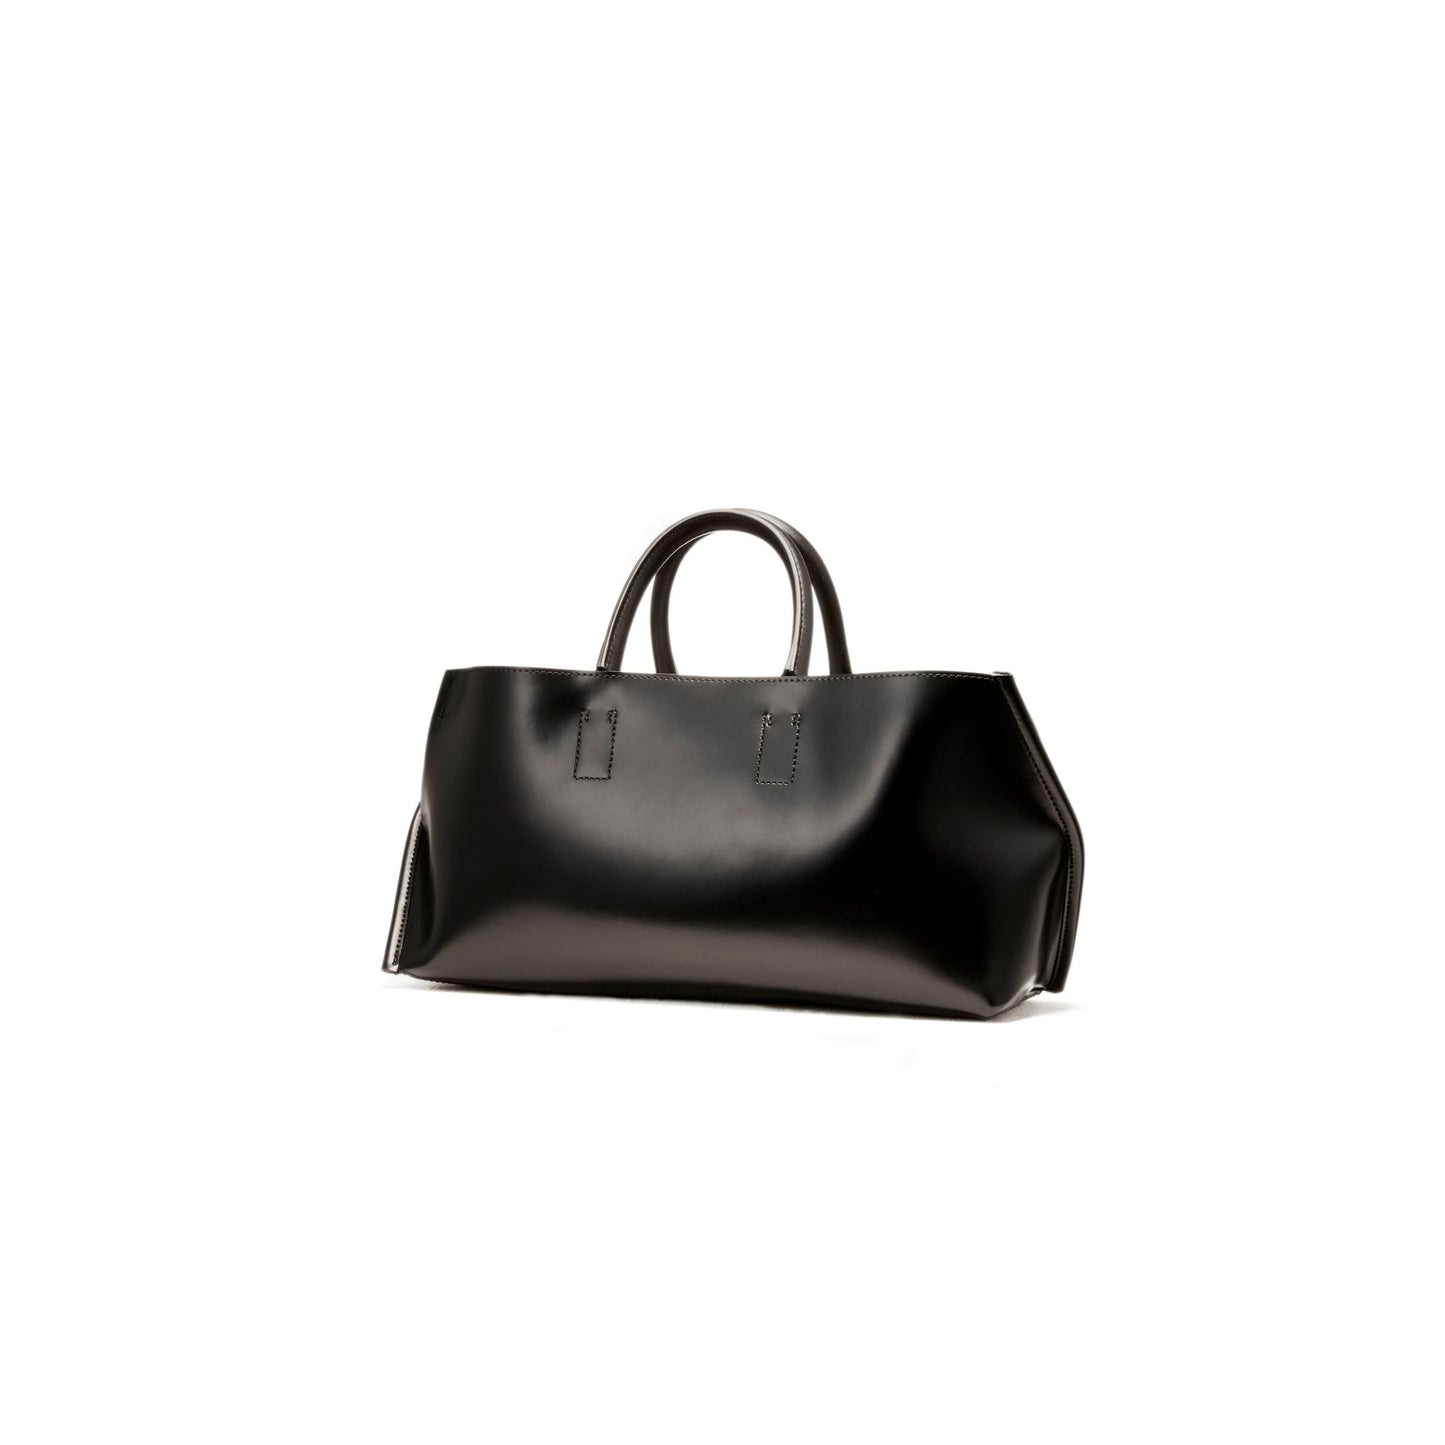 【Courtney Orla / コートニーオーラ】SLOPE wine tote S PVC/Pig L./Cow L. - Black/Chinese Red